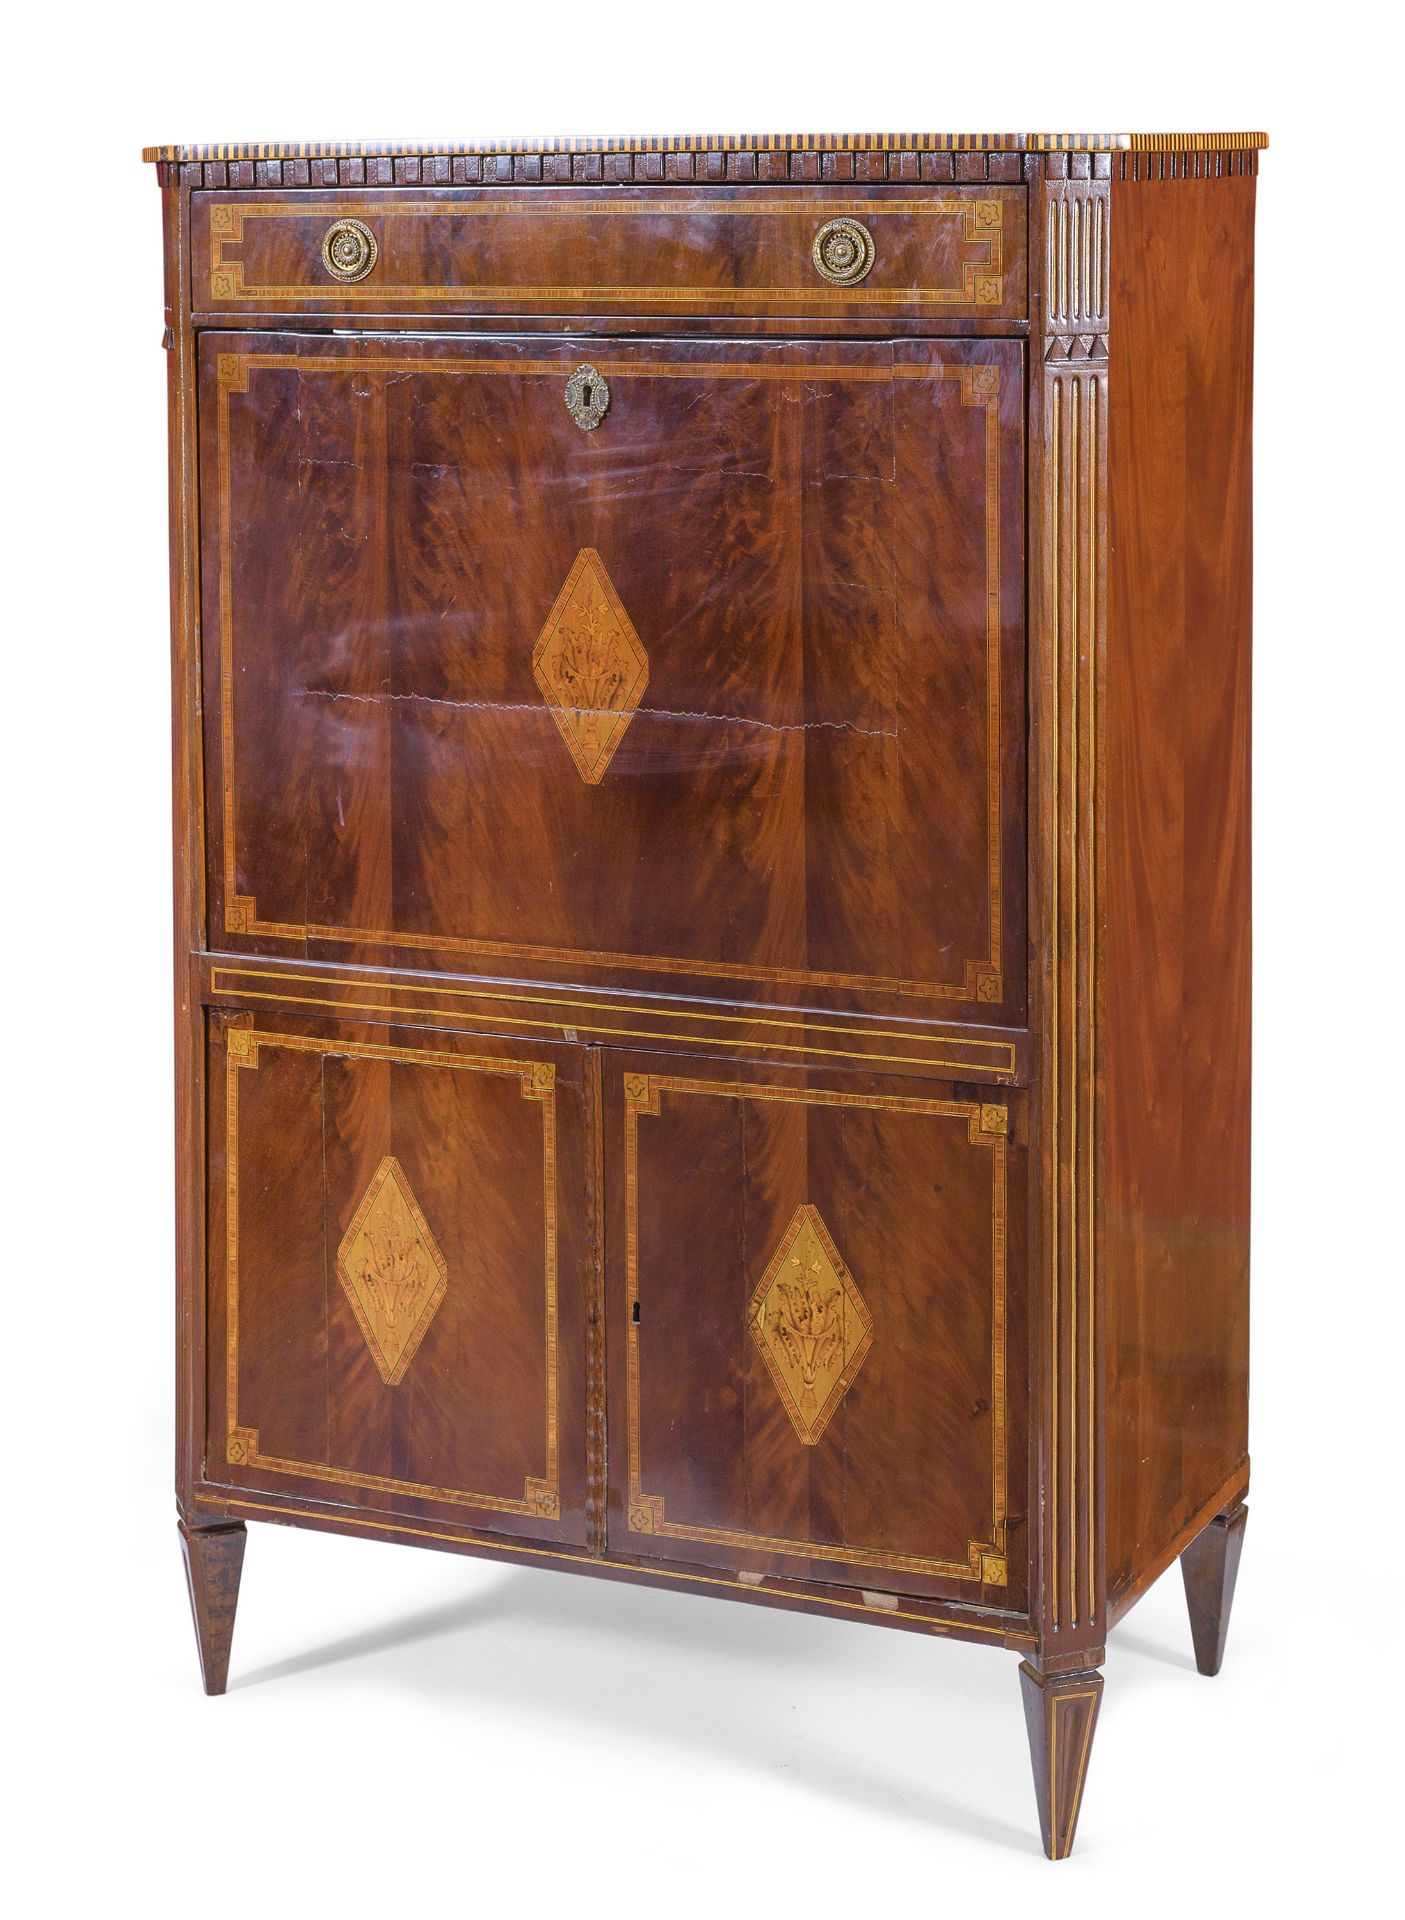 BEAUTIFUL MAHOGANY SECRETAIRE FRANCE END OF THE 18TH CENTURY